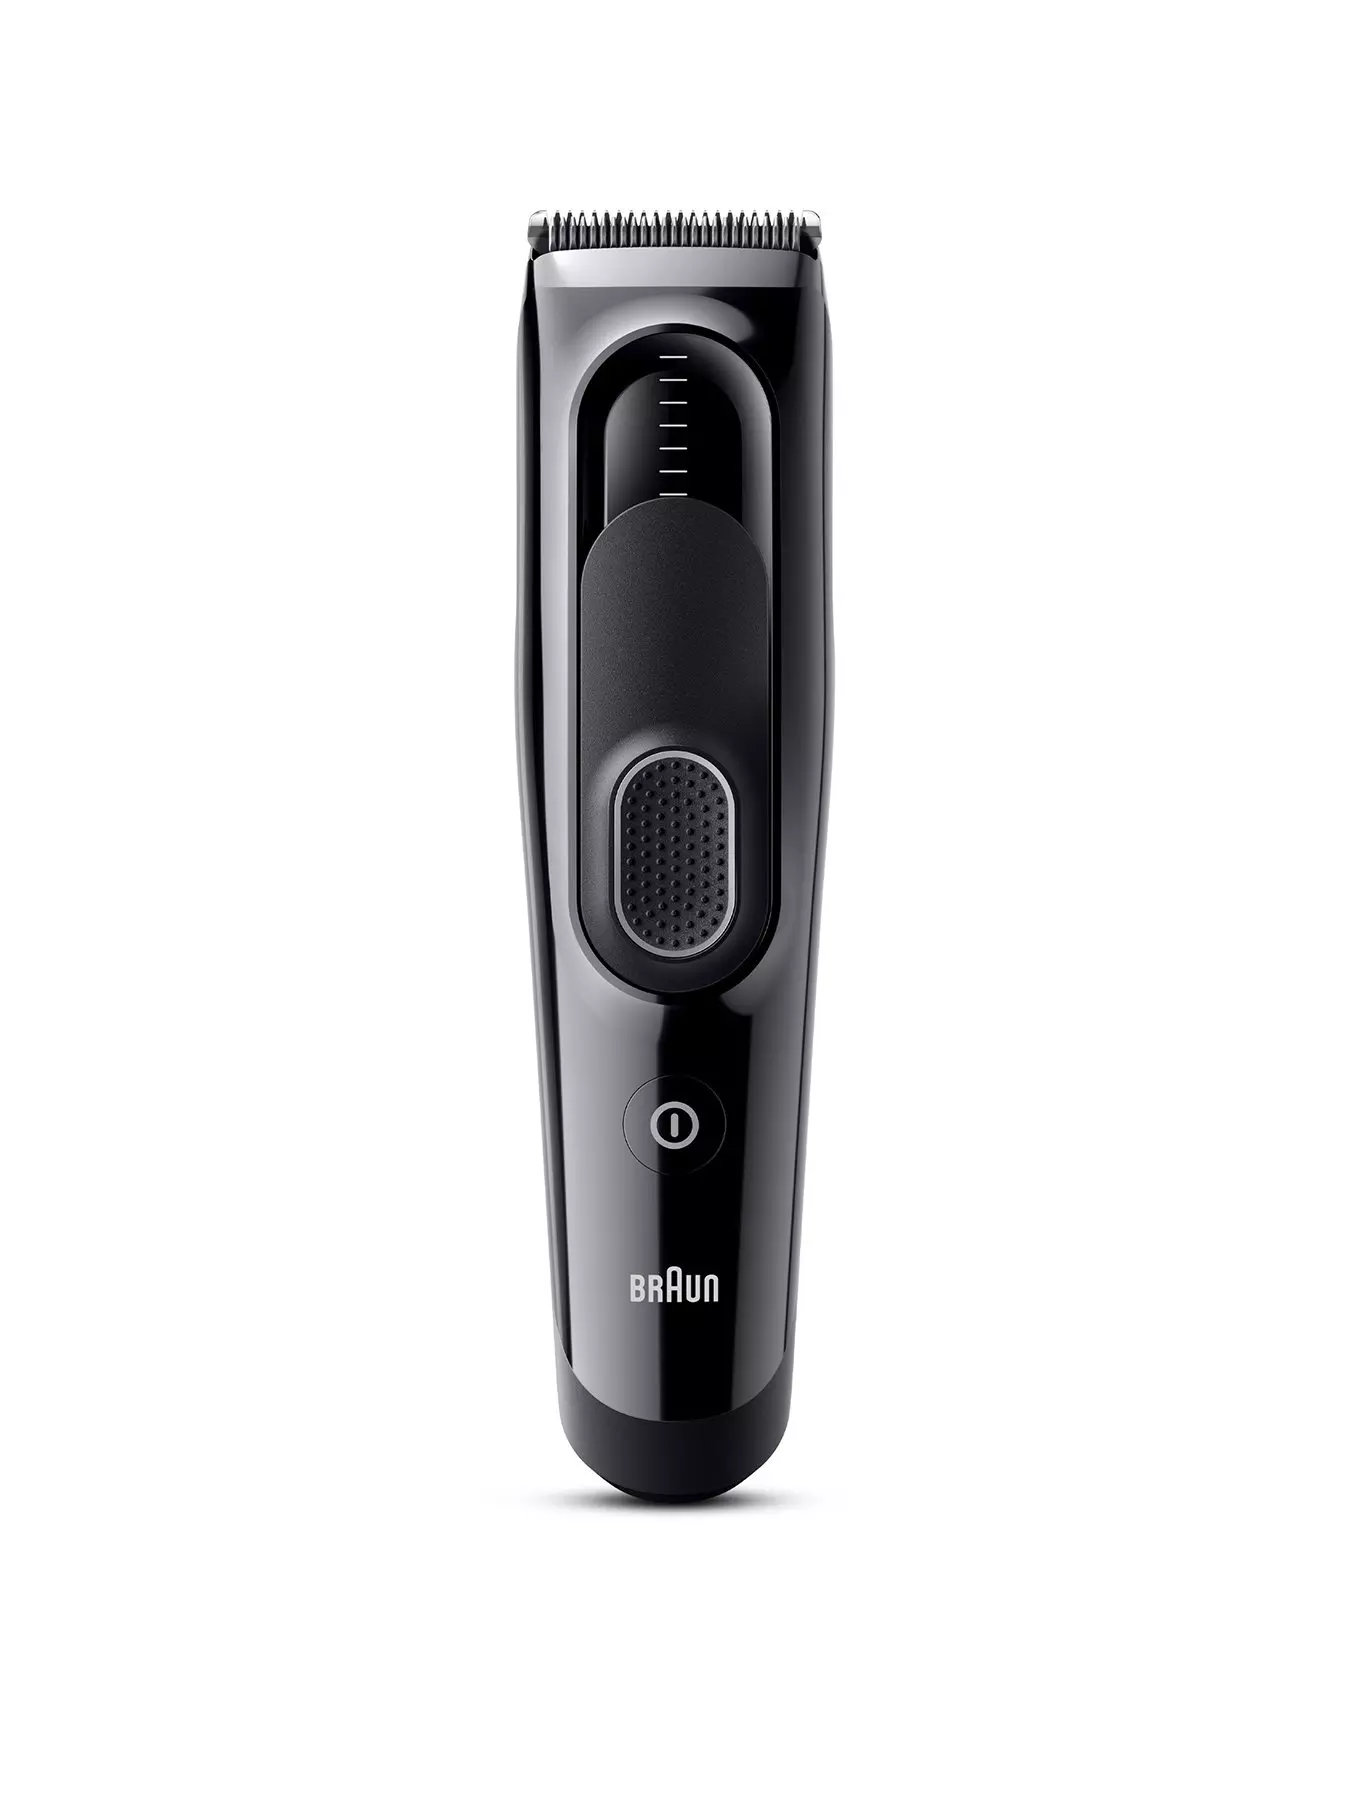 Dringender Sonderverkauf 4 | All clippers | trimmers & Hair | Beauty Offers